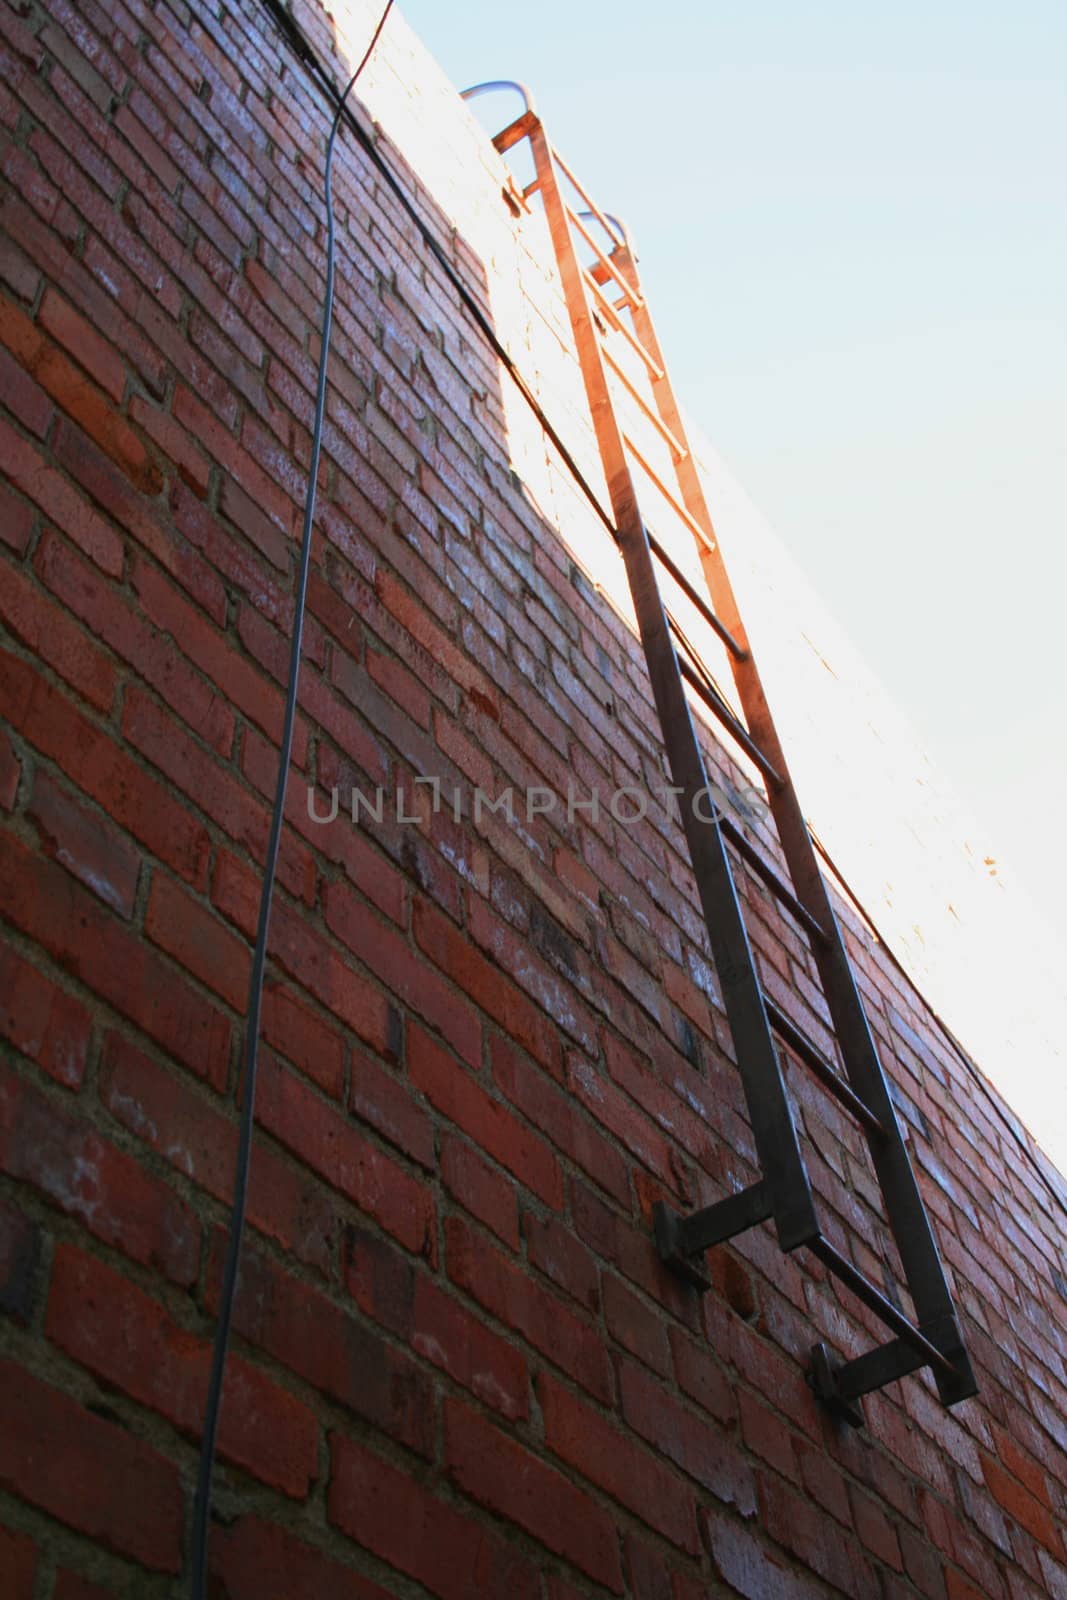 Ladder on a brickwall over blue sky showing unique pattern.
